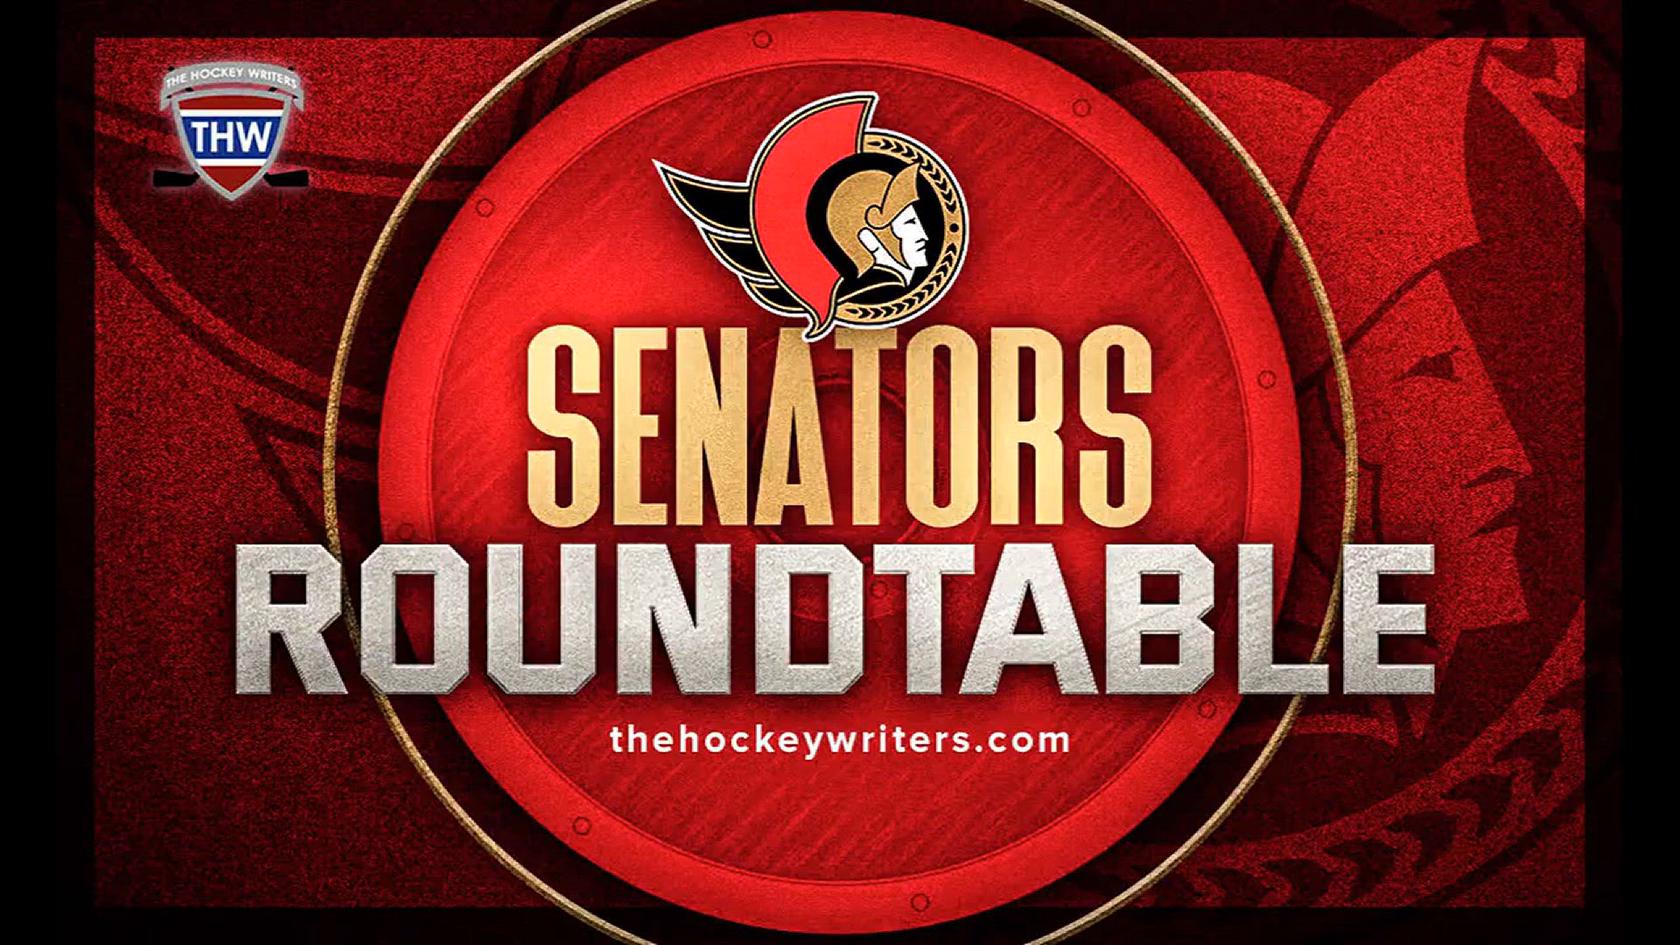 'Video thumbnail for Senators Roundtable - Thomson Signs in SHL, Looking Back at Past NHL Drafts & More'